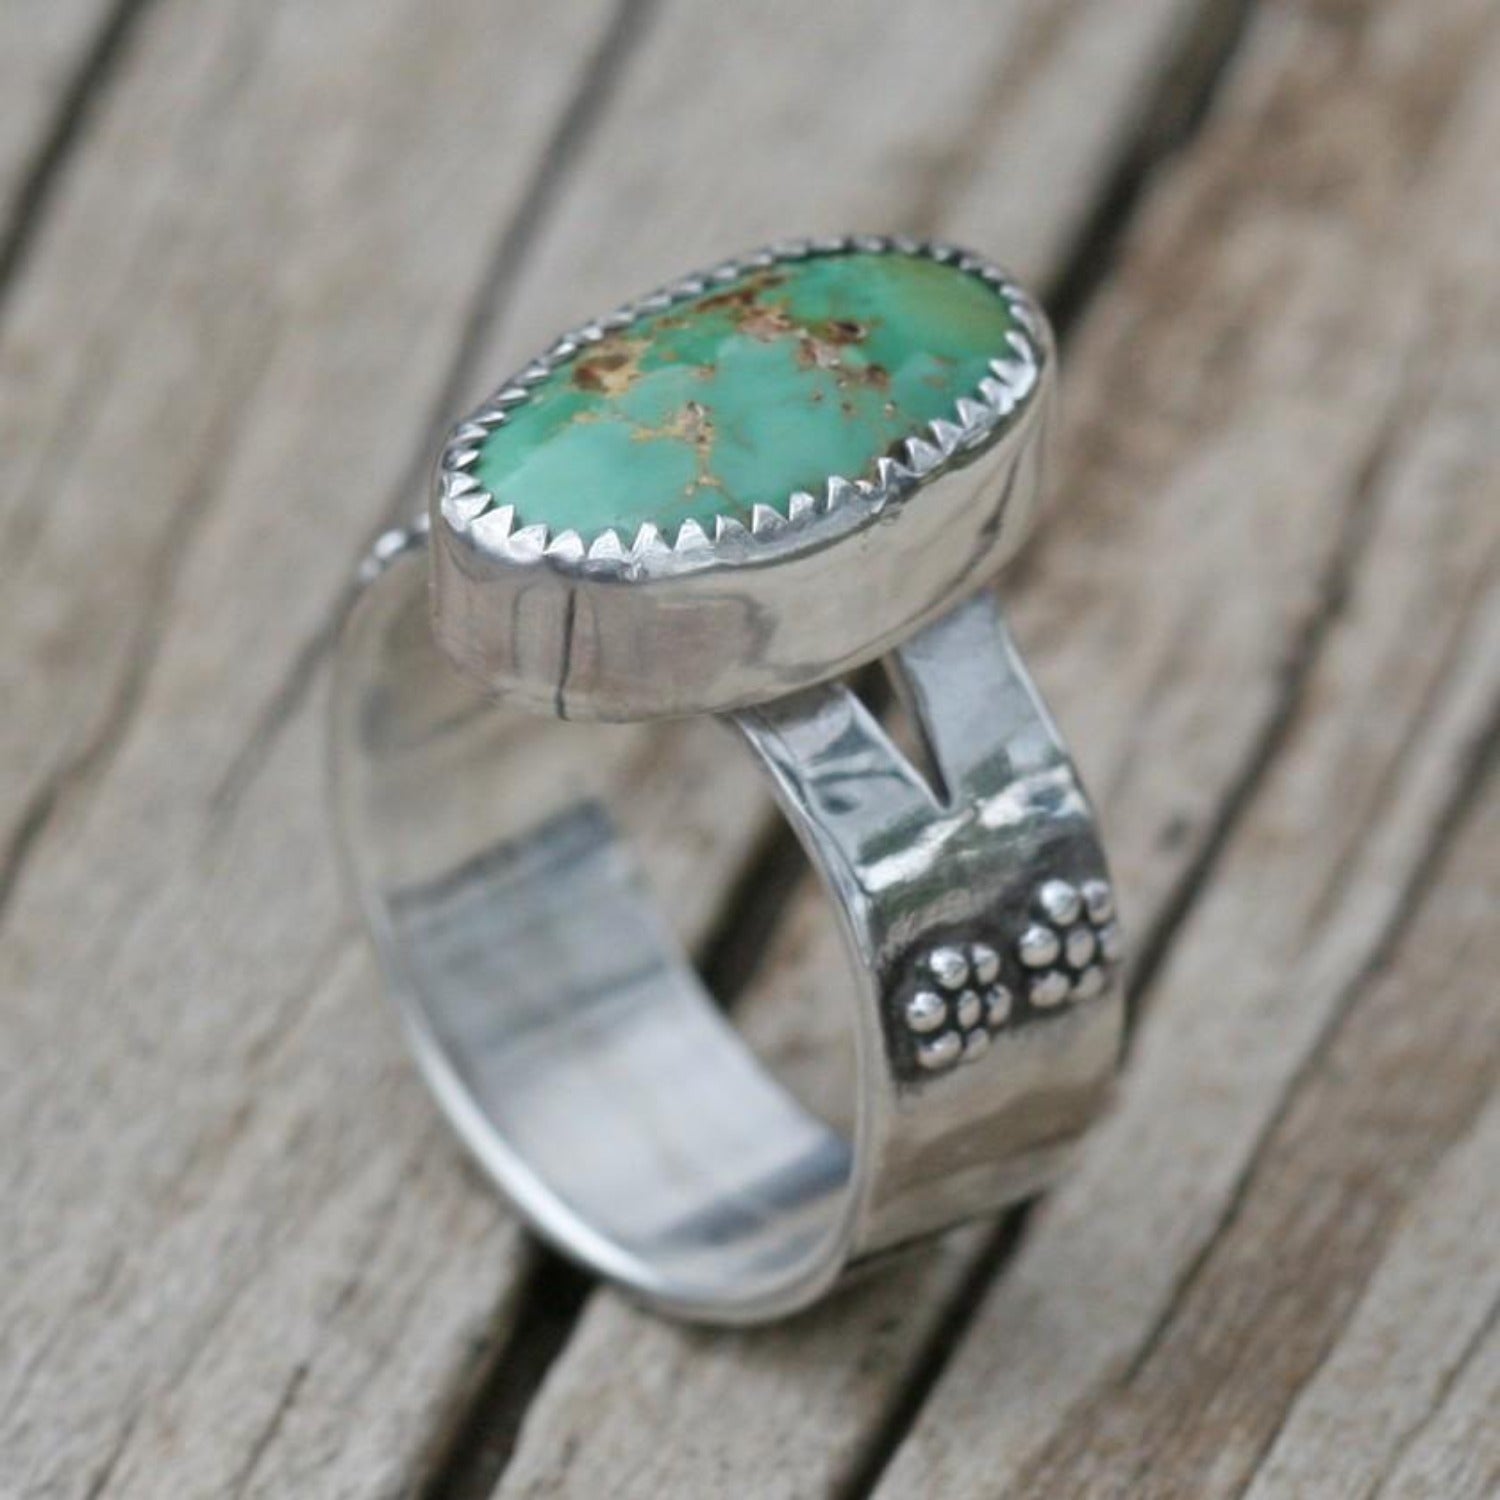 Boho Green Turquoise Sterling Silver Ring - Size 7 1/4